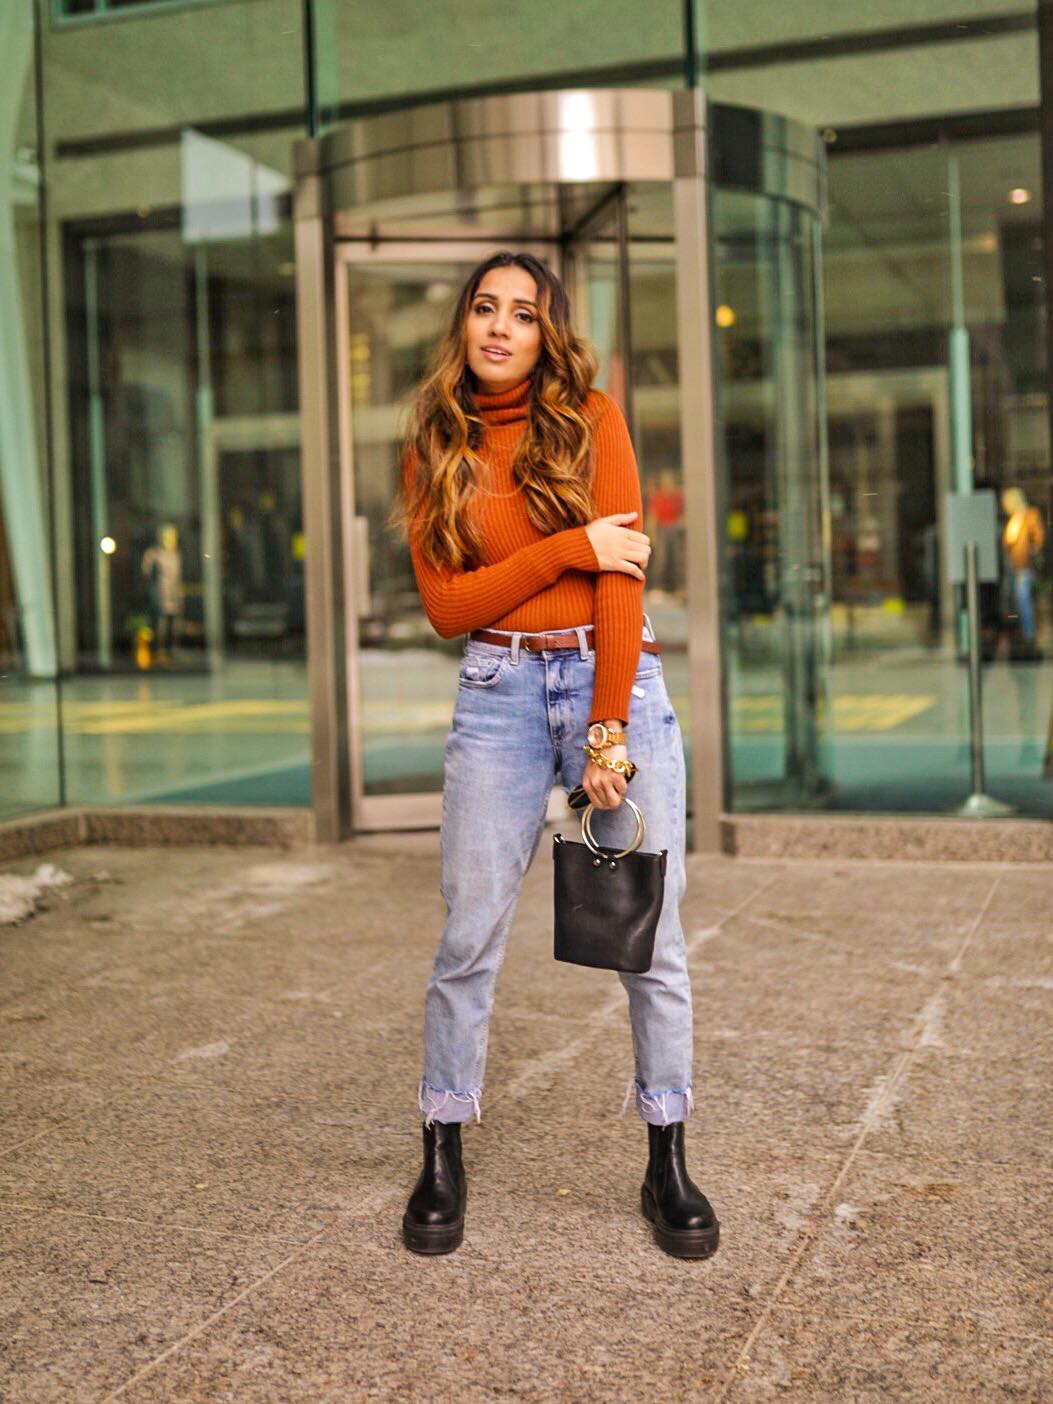 Street style boyfriend jeans Toronto fashion week ootd hm jeans asos boots faiza inam sincerely humble 2